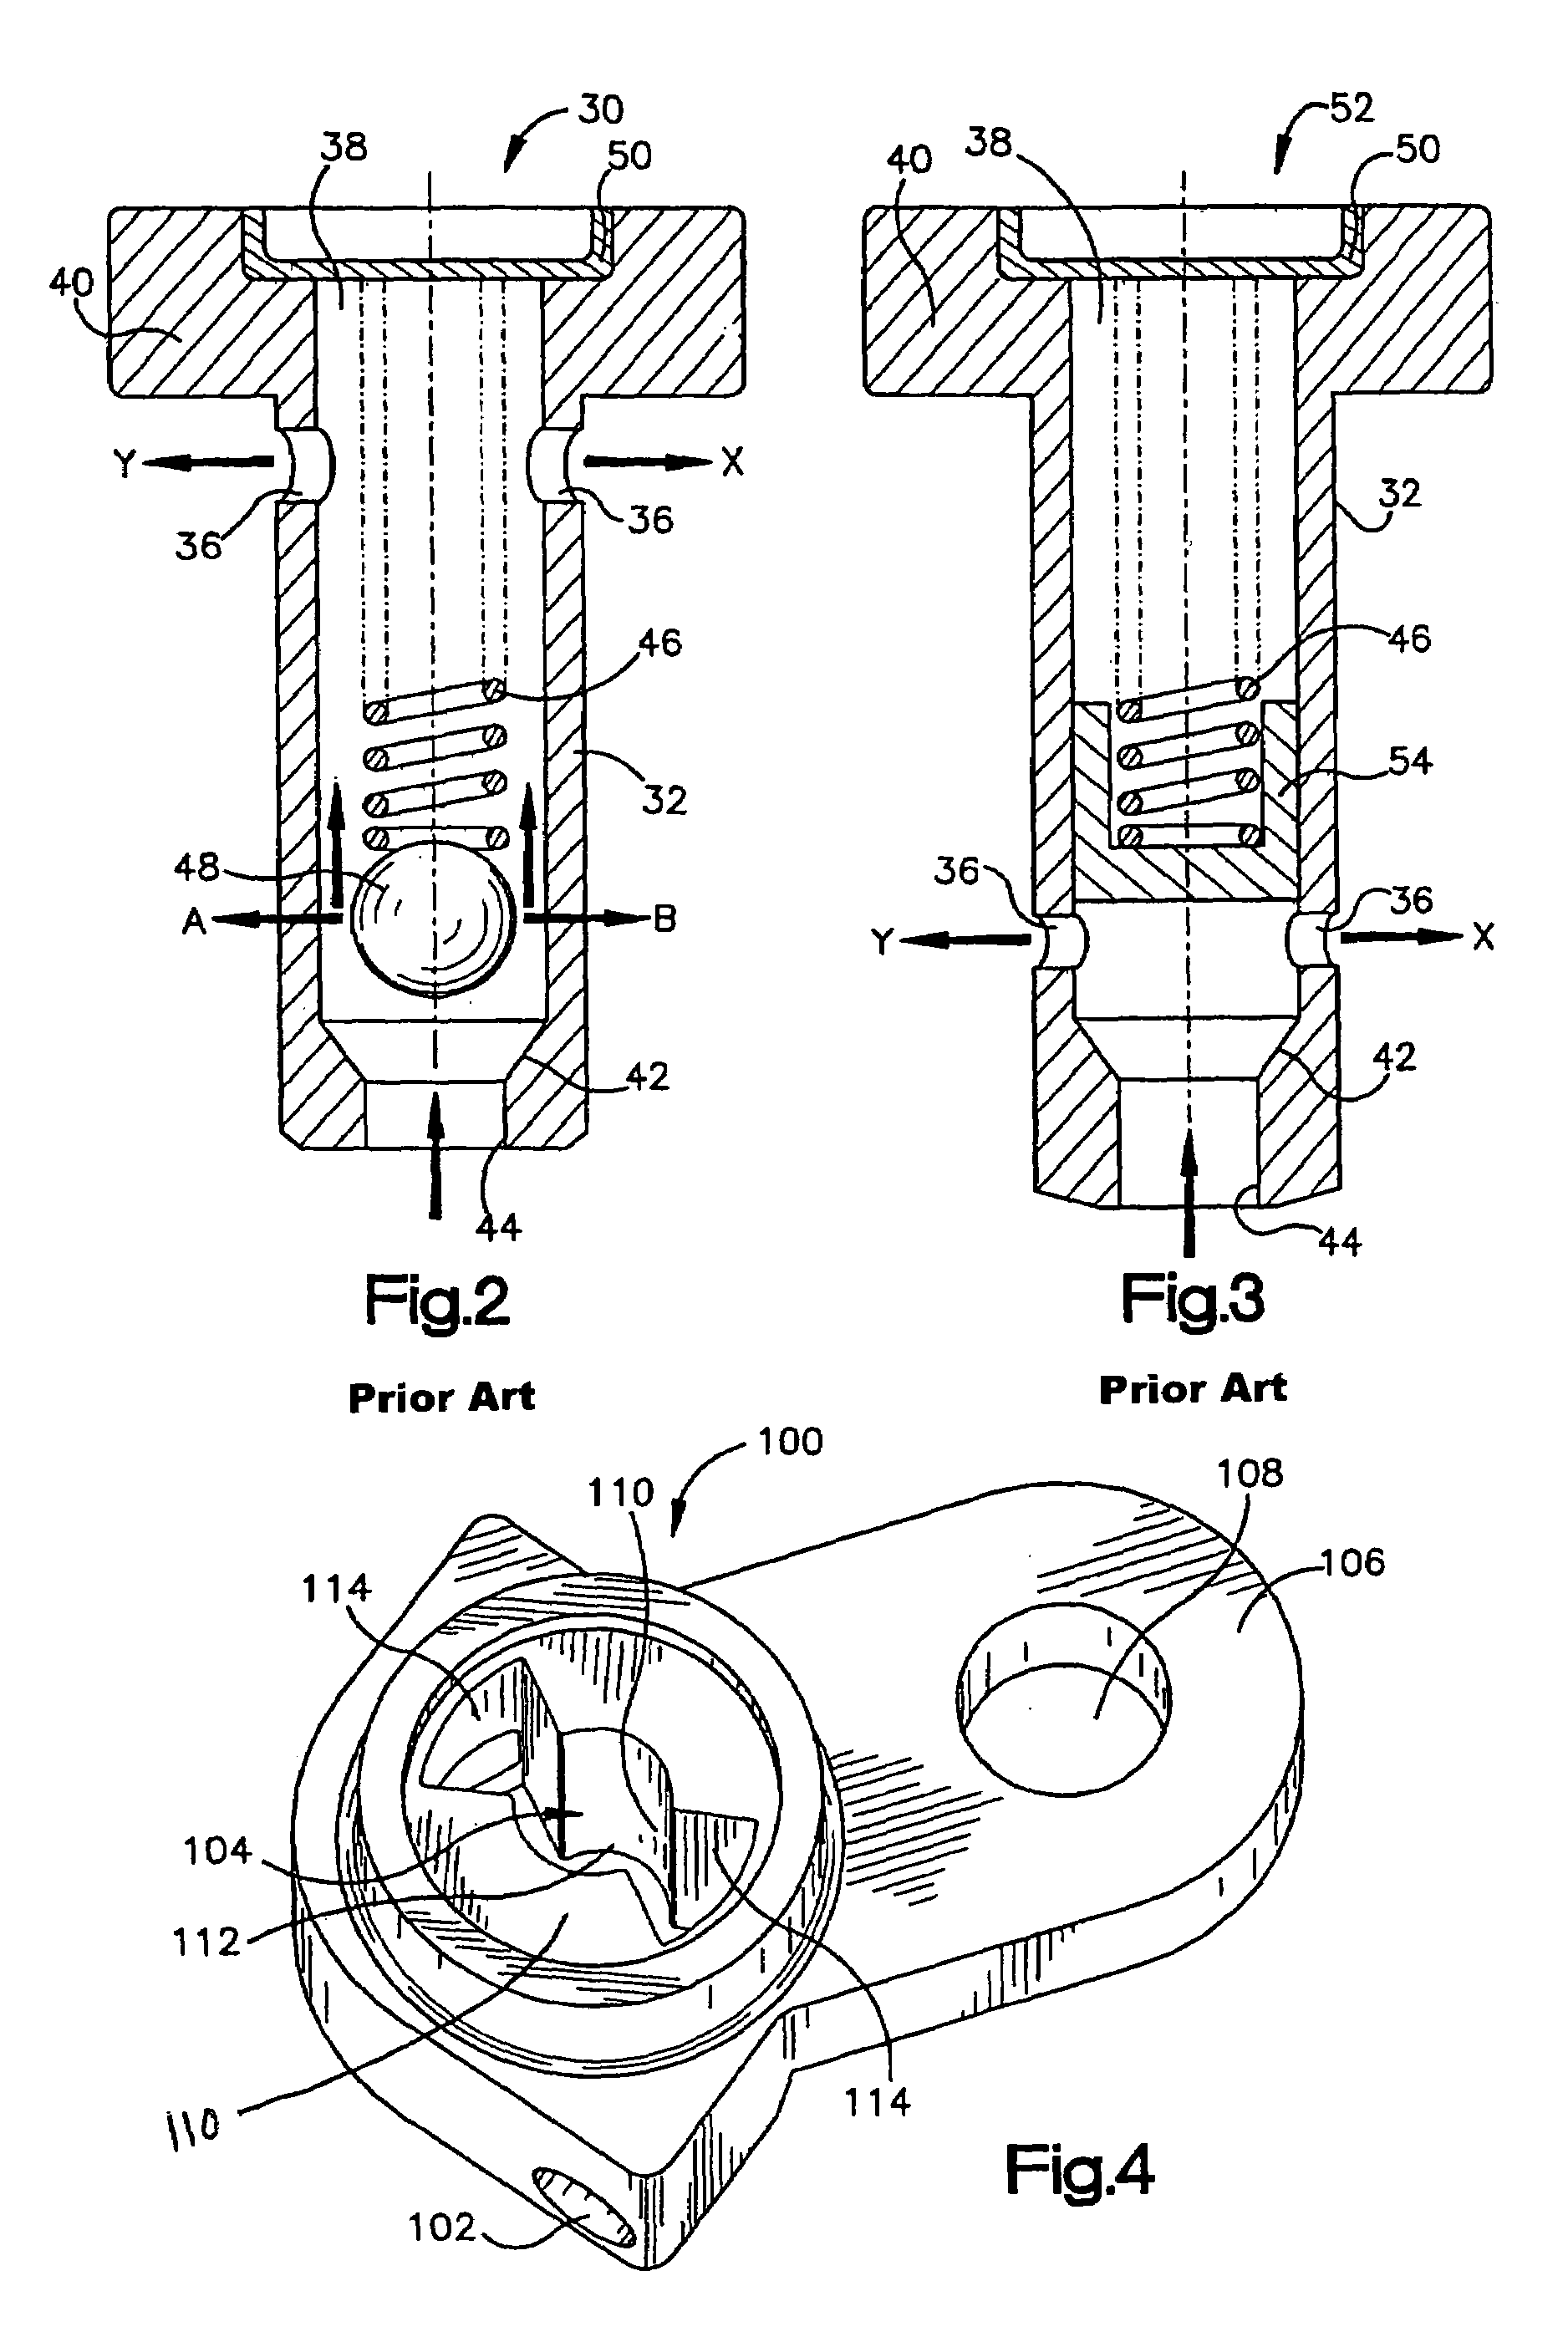 Fluid jet for providing fluid under pressure to a desired location